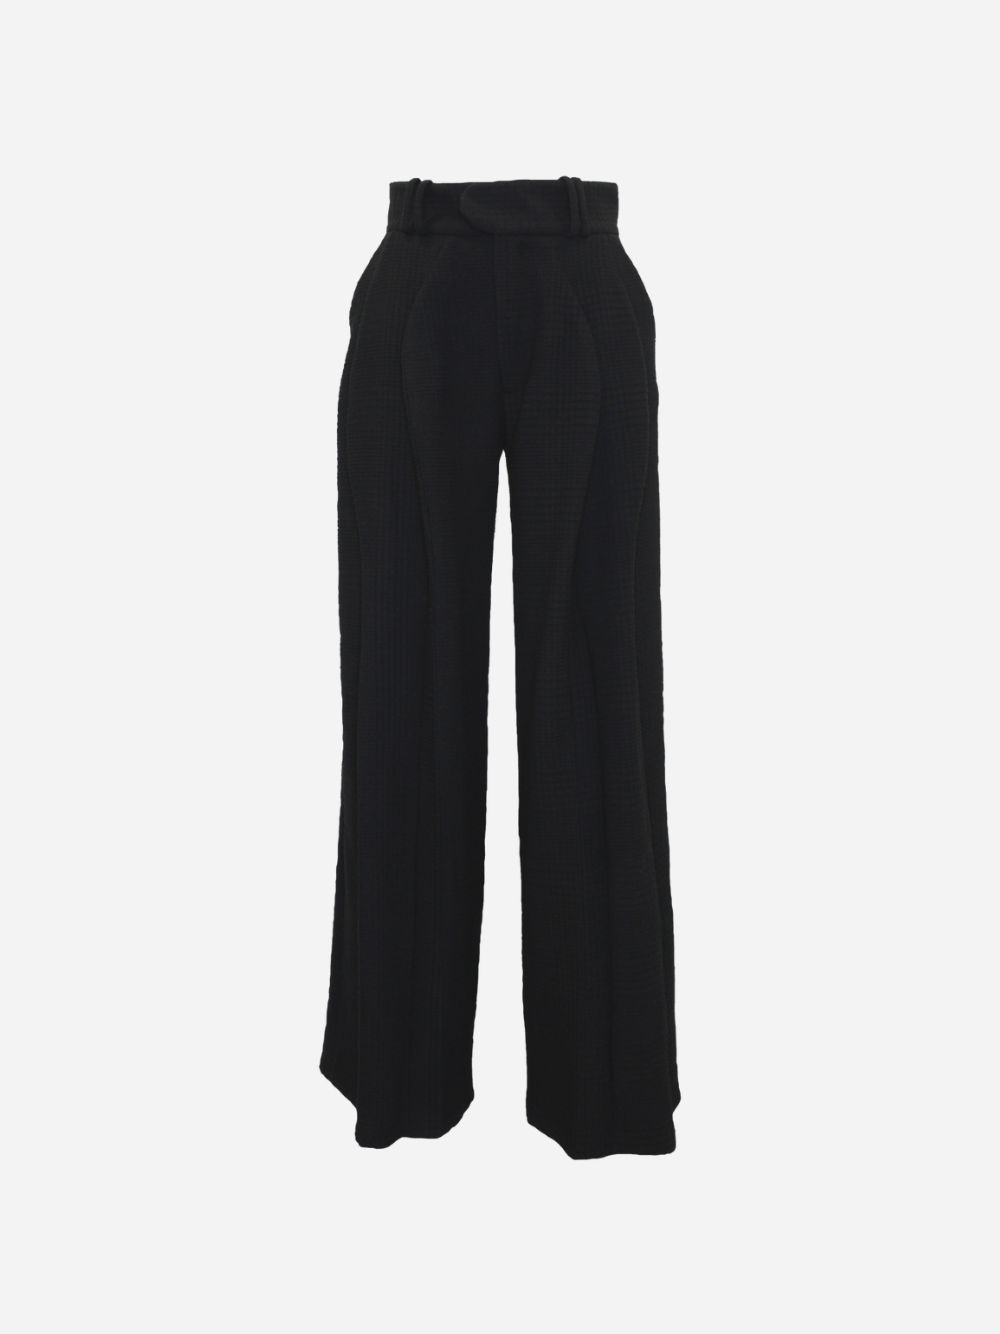 Black Straight Cut Pleated Trousers